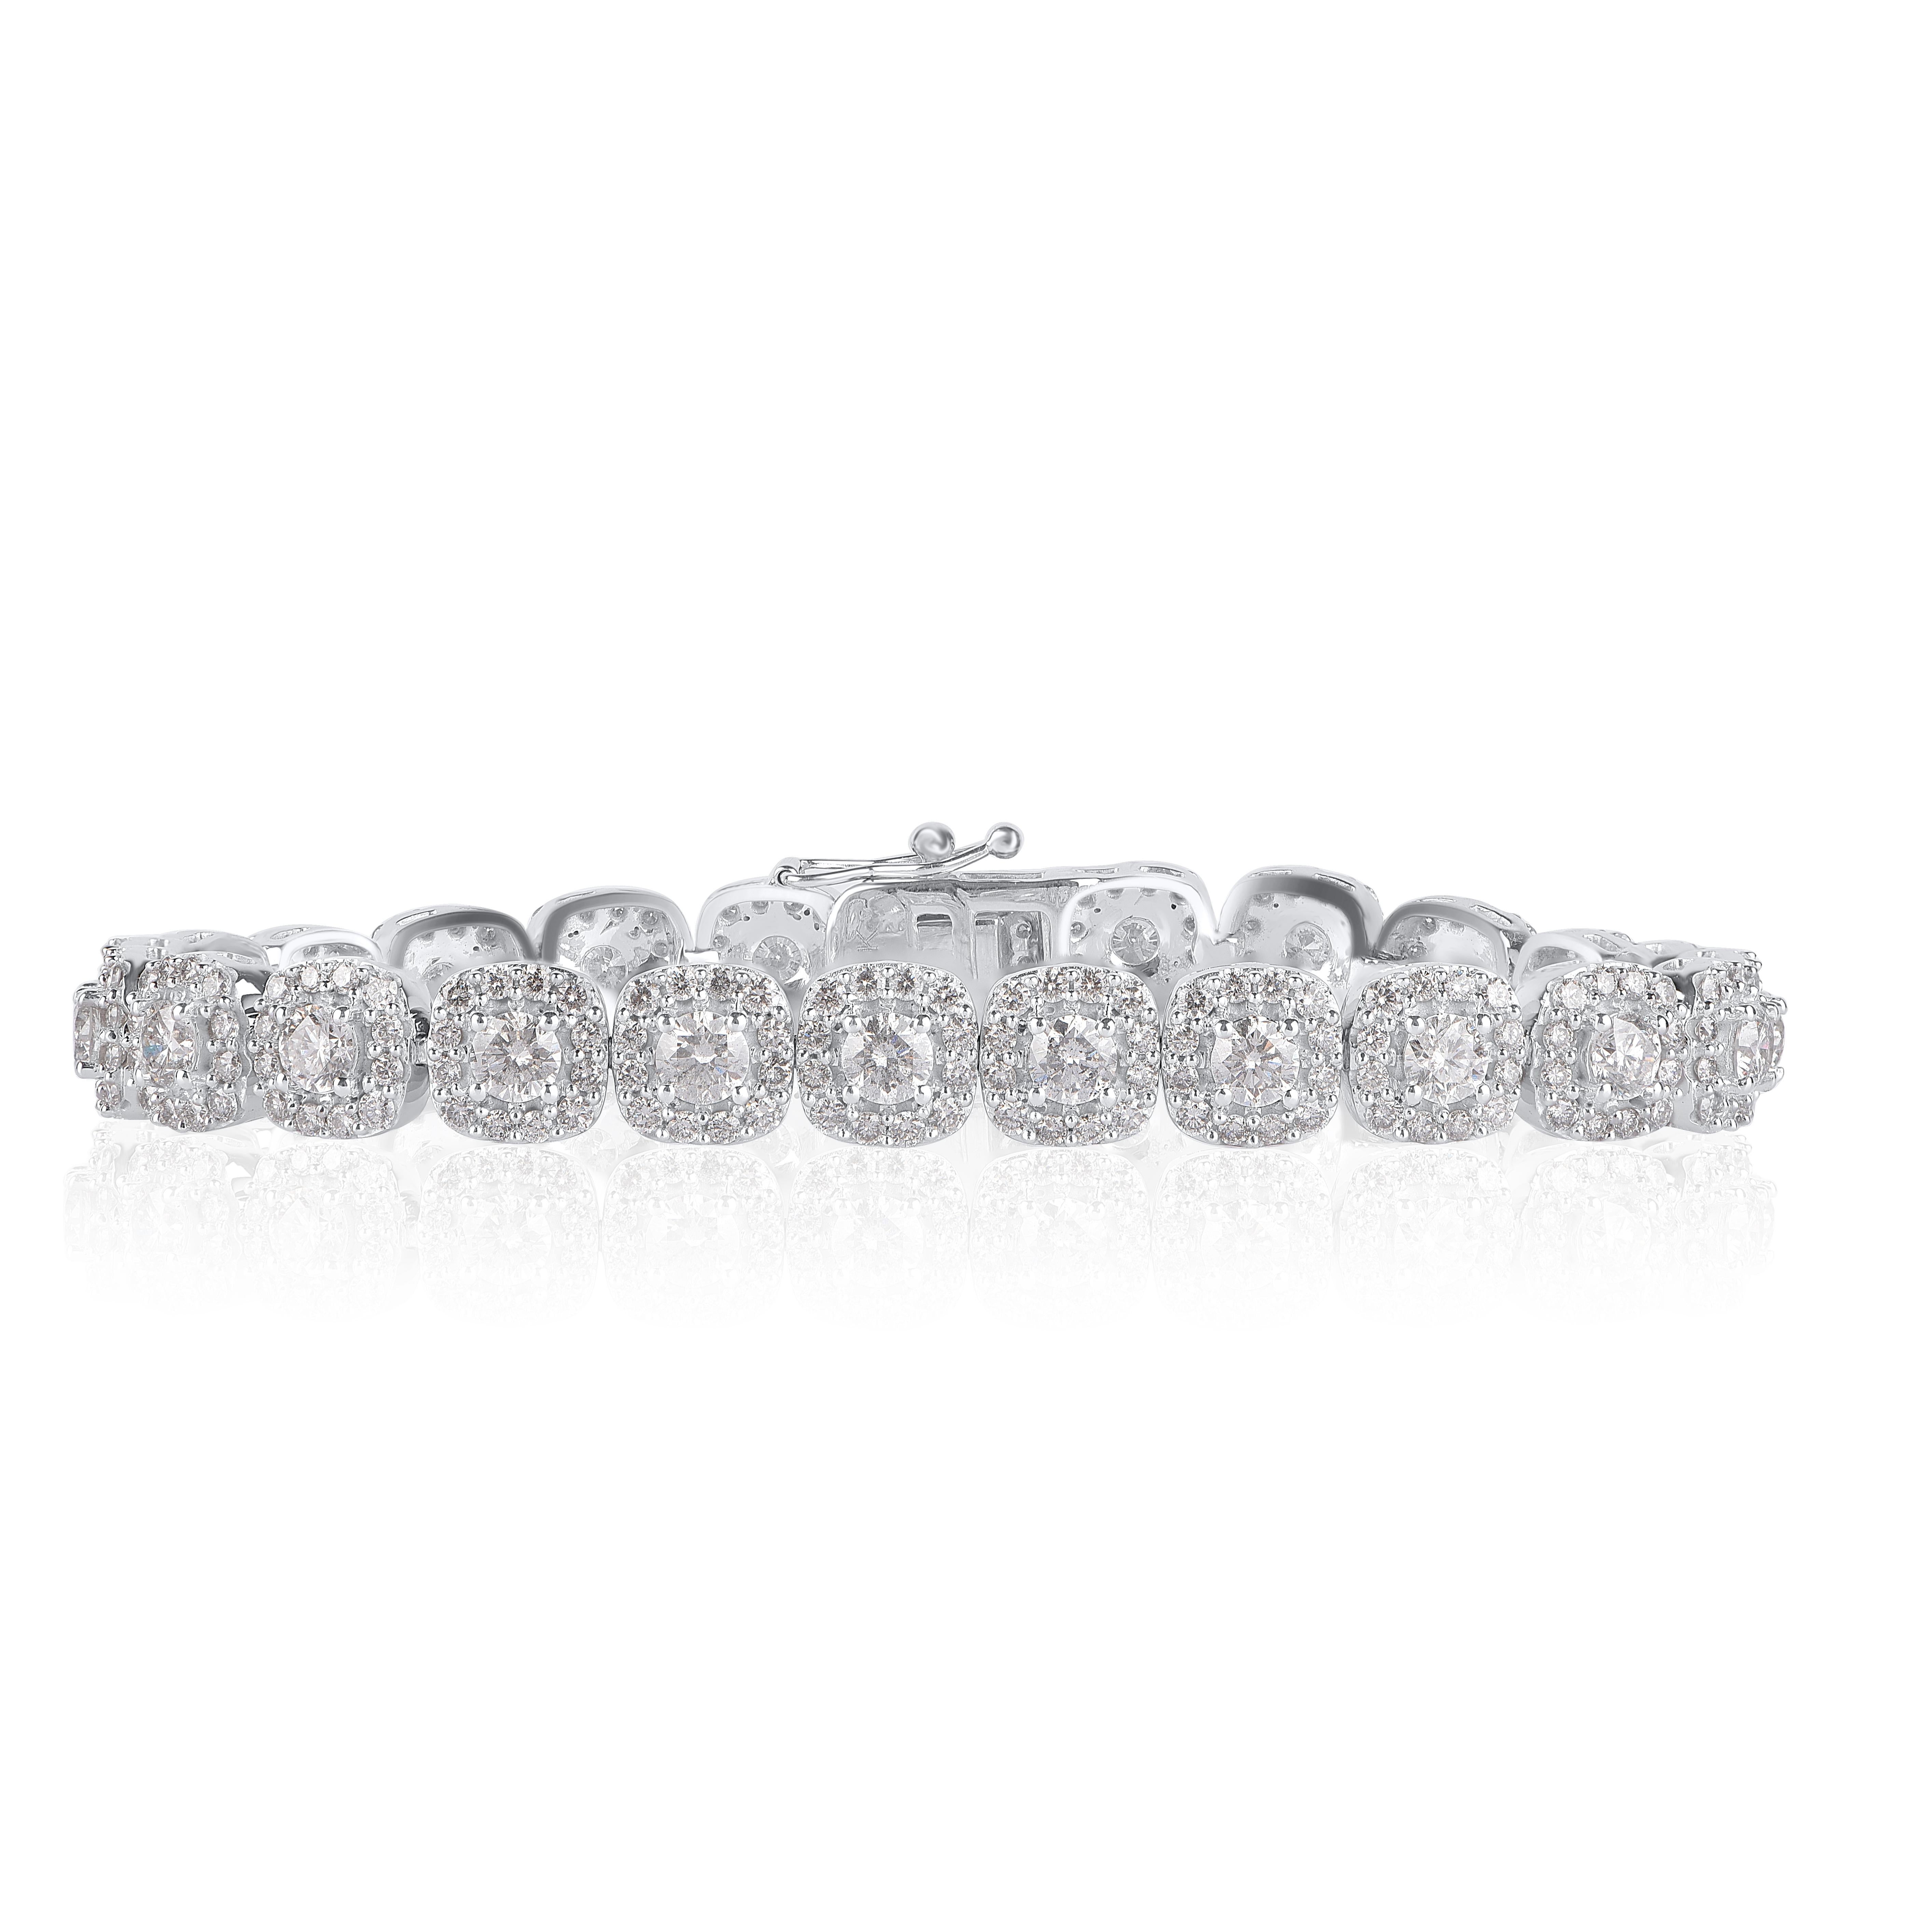 A exquisitely designed diamond bracelet studded with 312 round-cut diamonds in prong setting, diamonds are graded H-I Color, I1-I2 Clarity. The bracelet secures easily with box clasp.